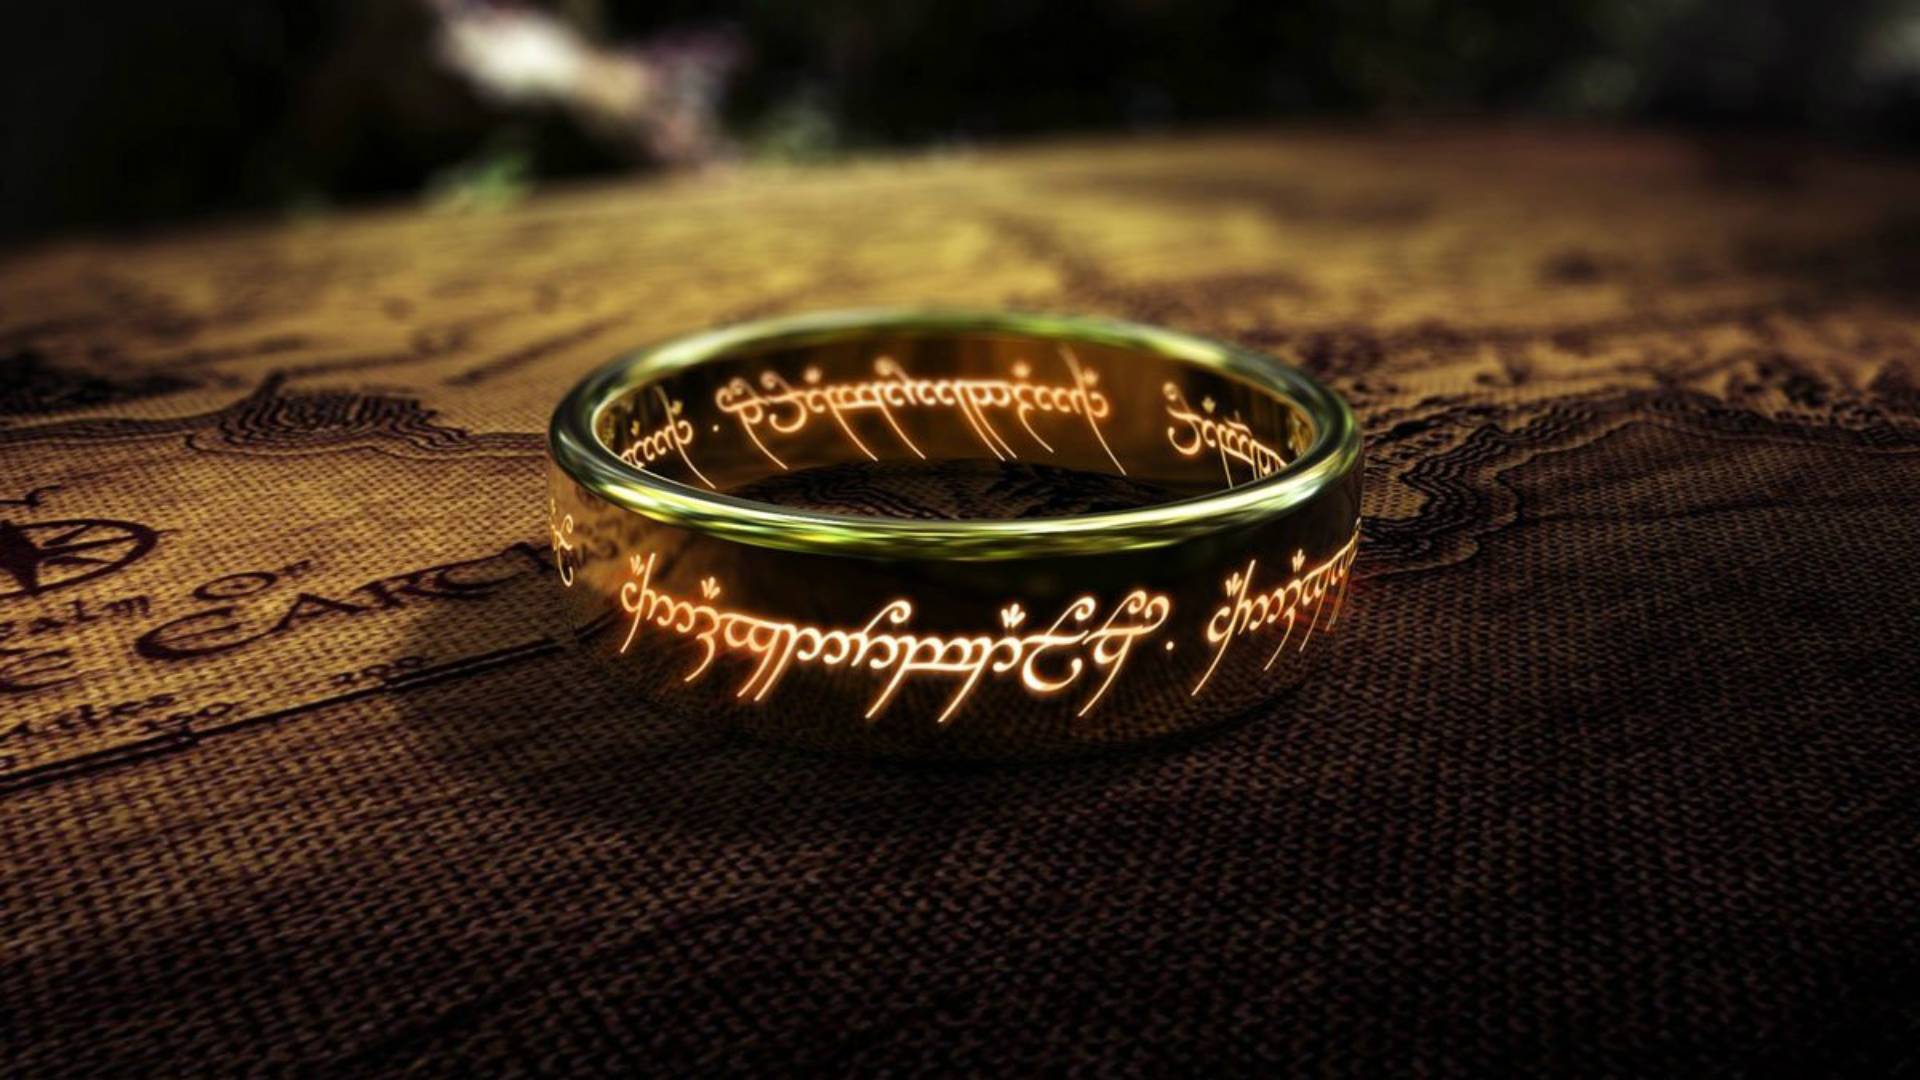 The Lord of the Rings The Rings of Power Title confirmed for Amazon